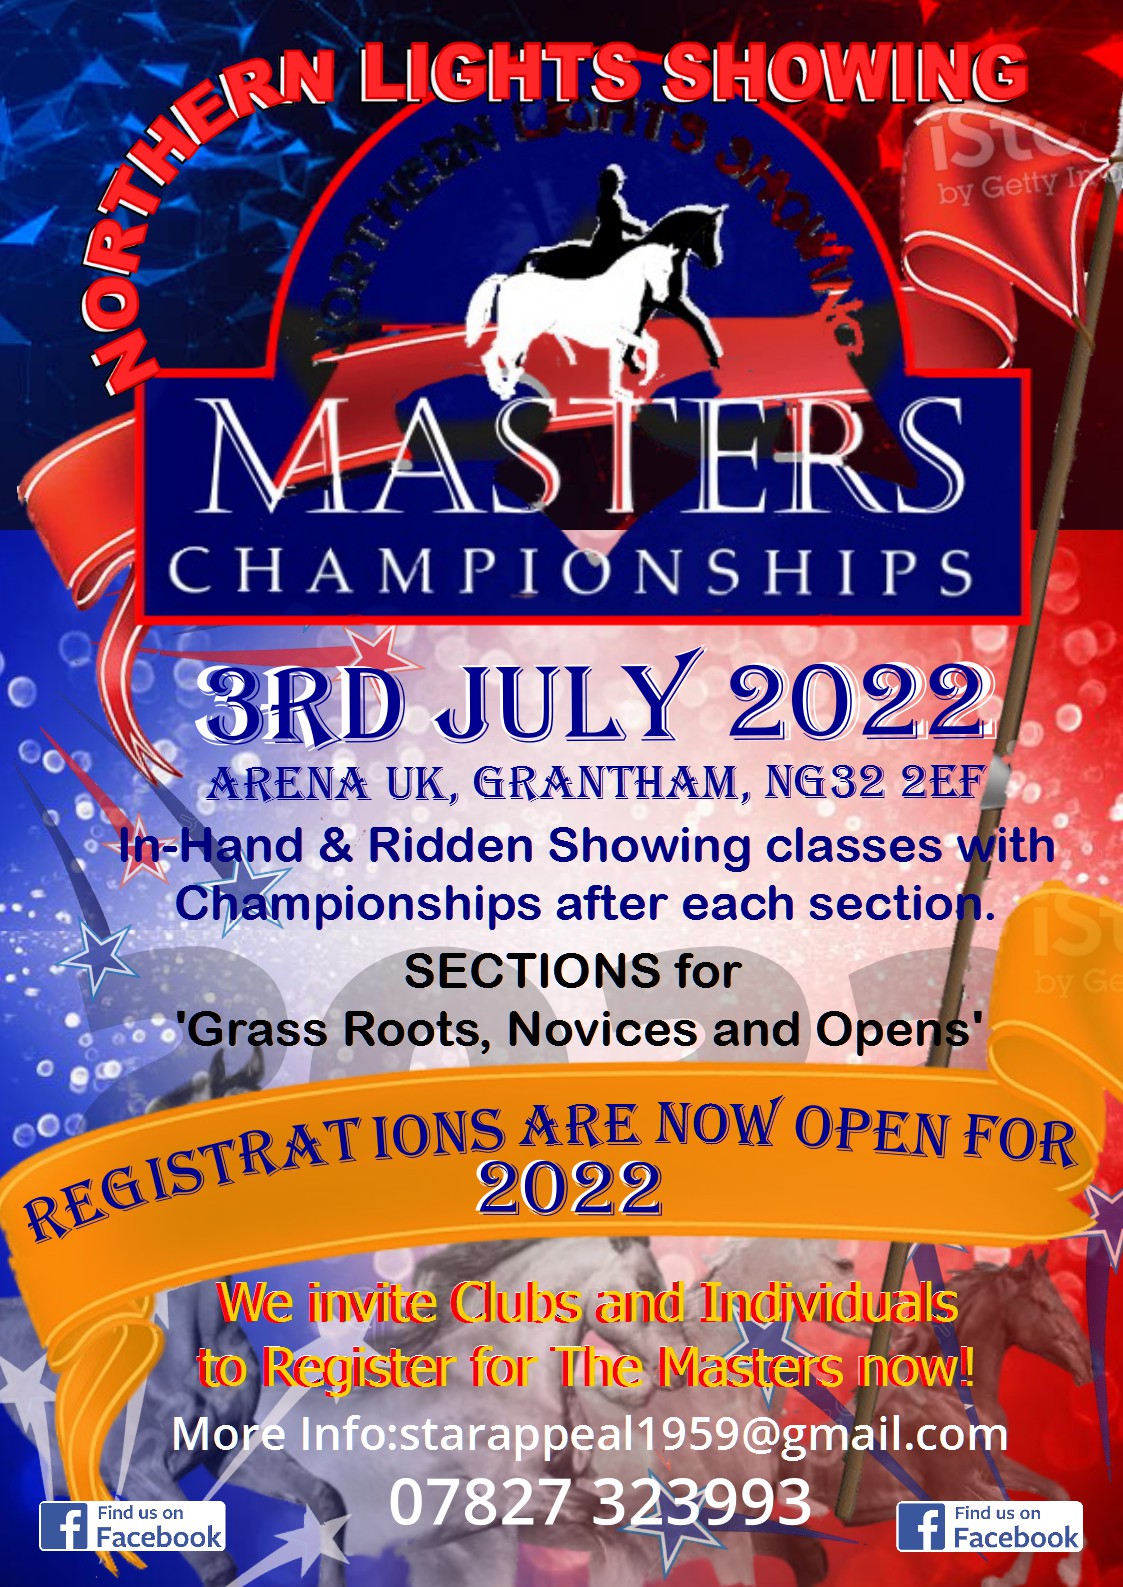 Northern Lights Showing – Masters Championship